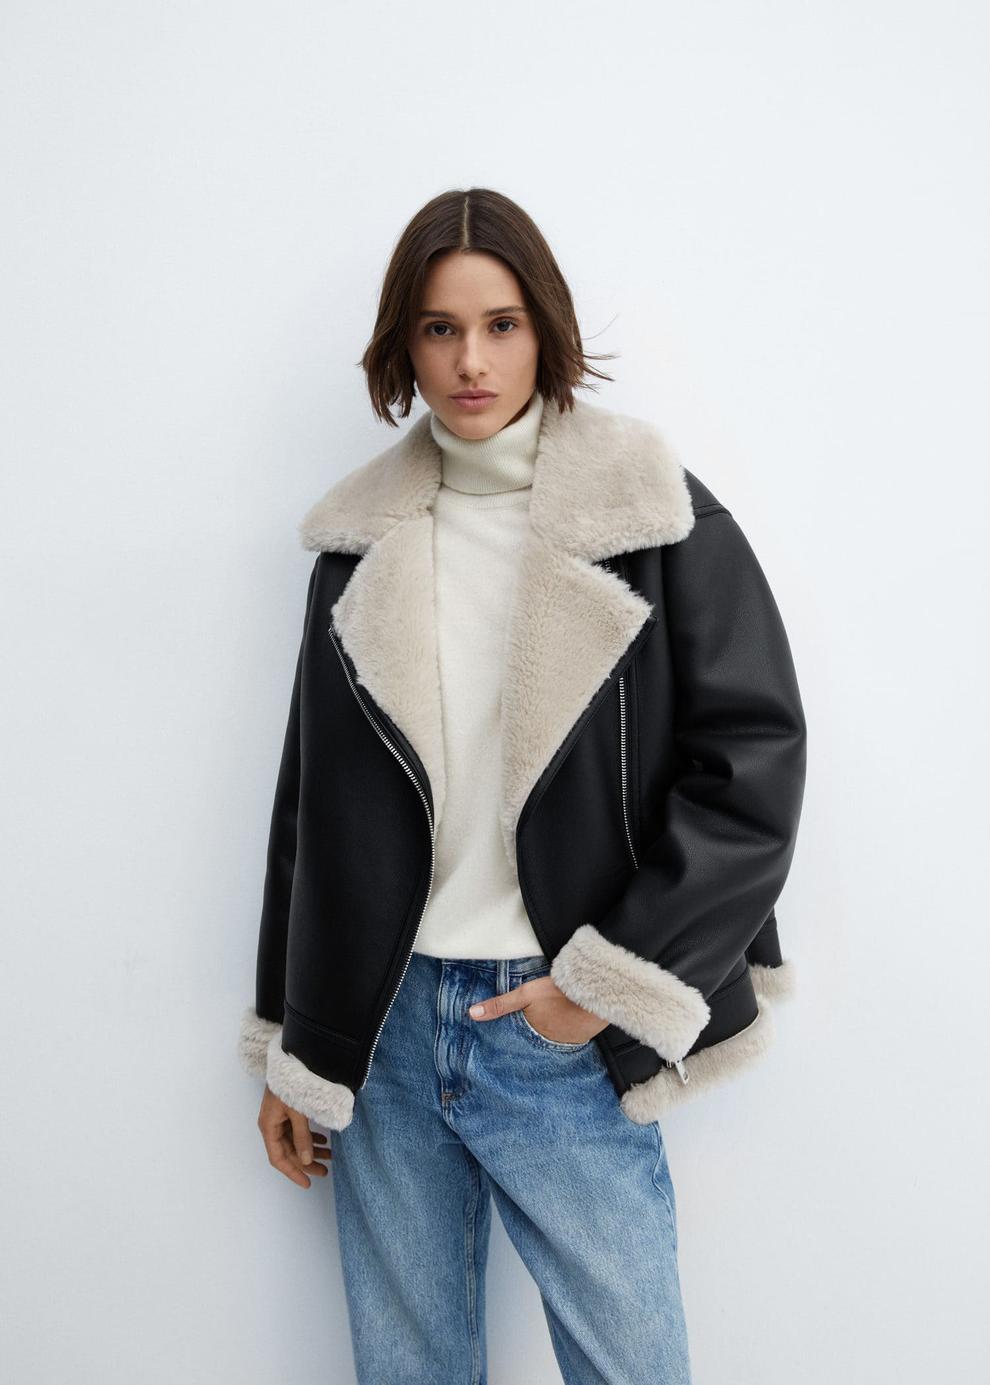 Faux shearling-lined jacket offers at $149.99 in Mango